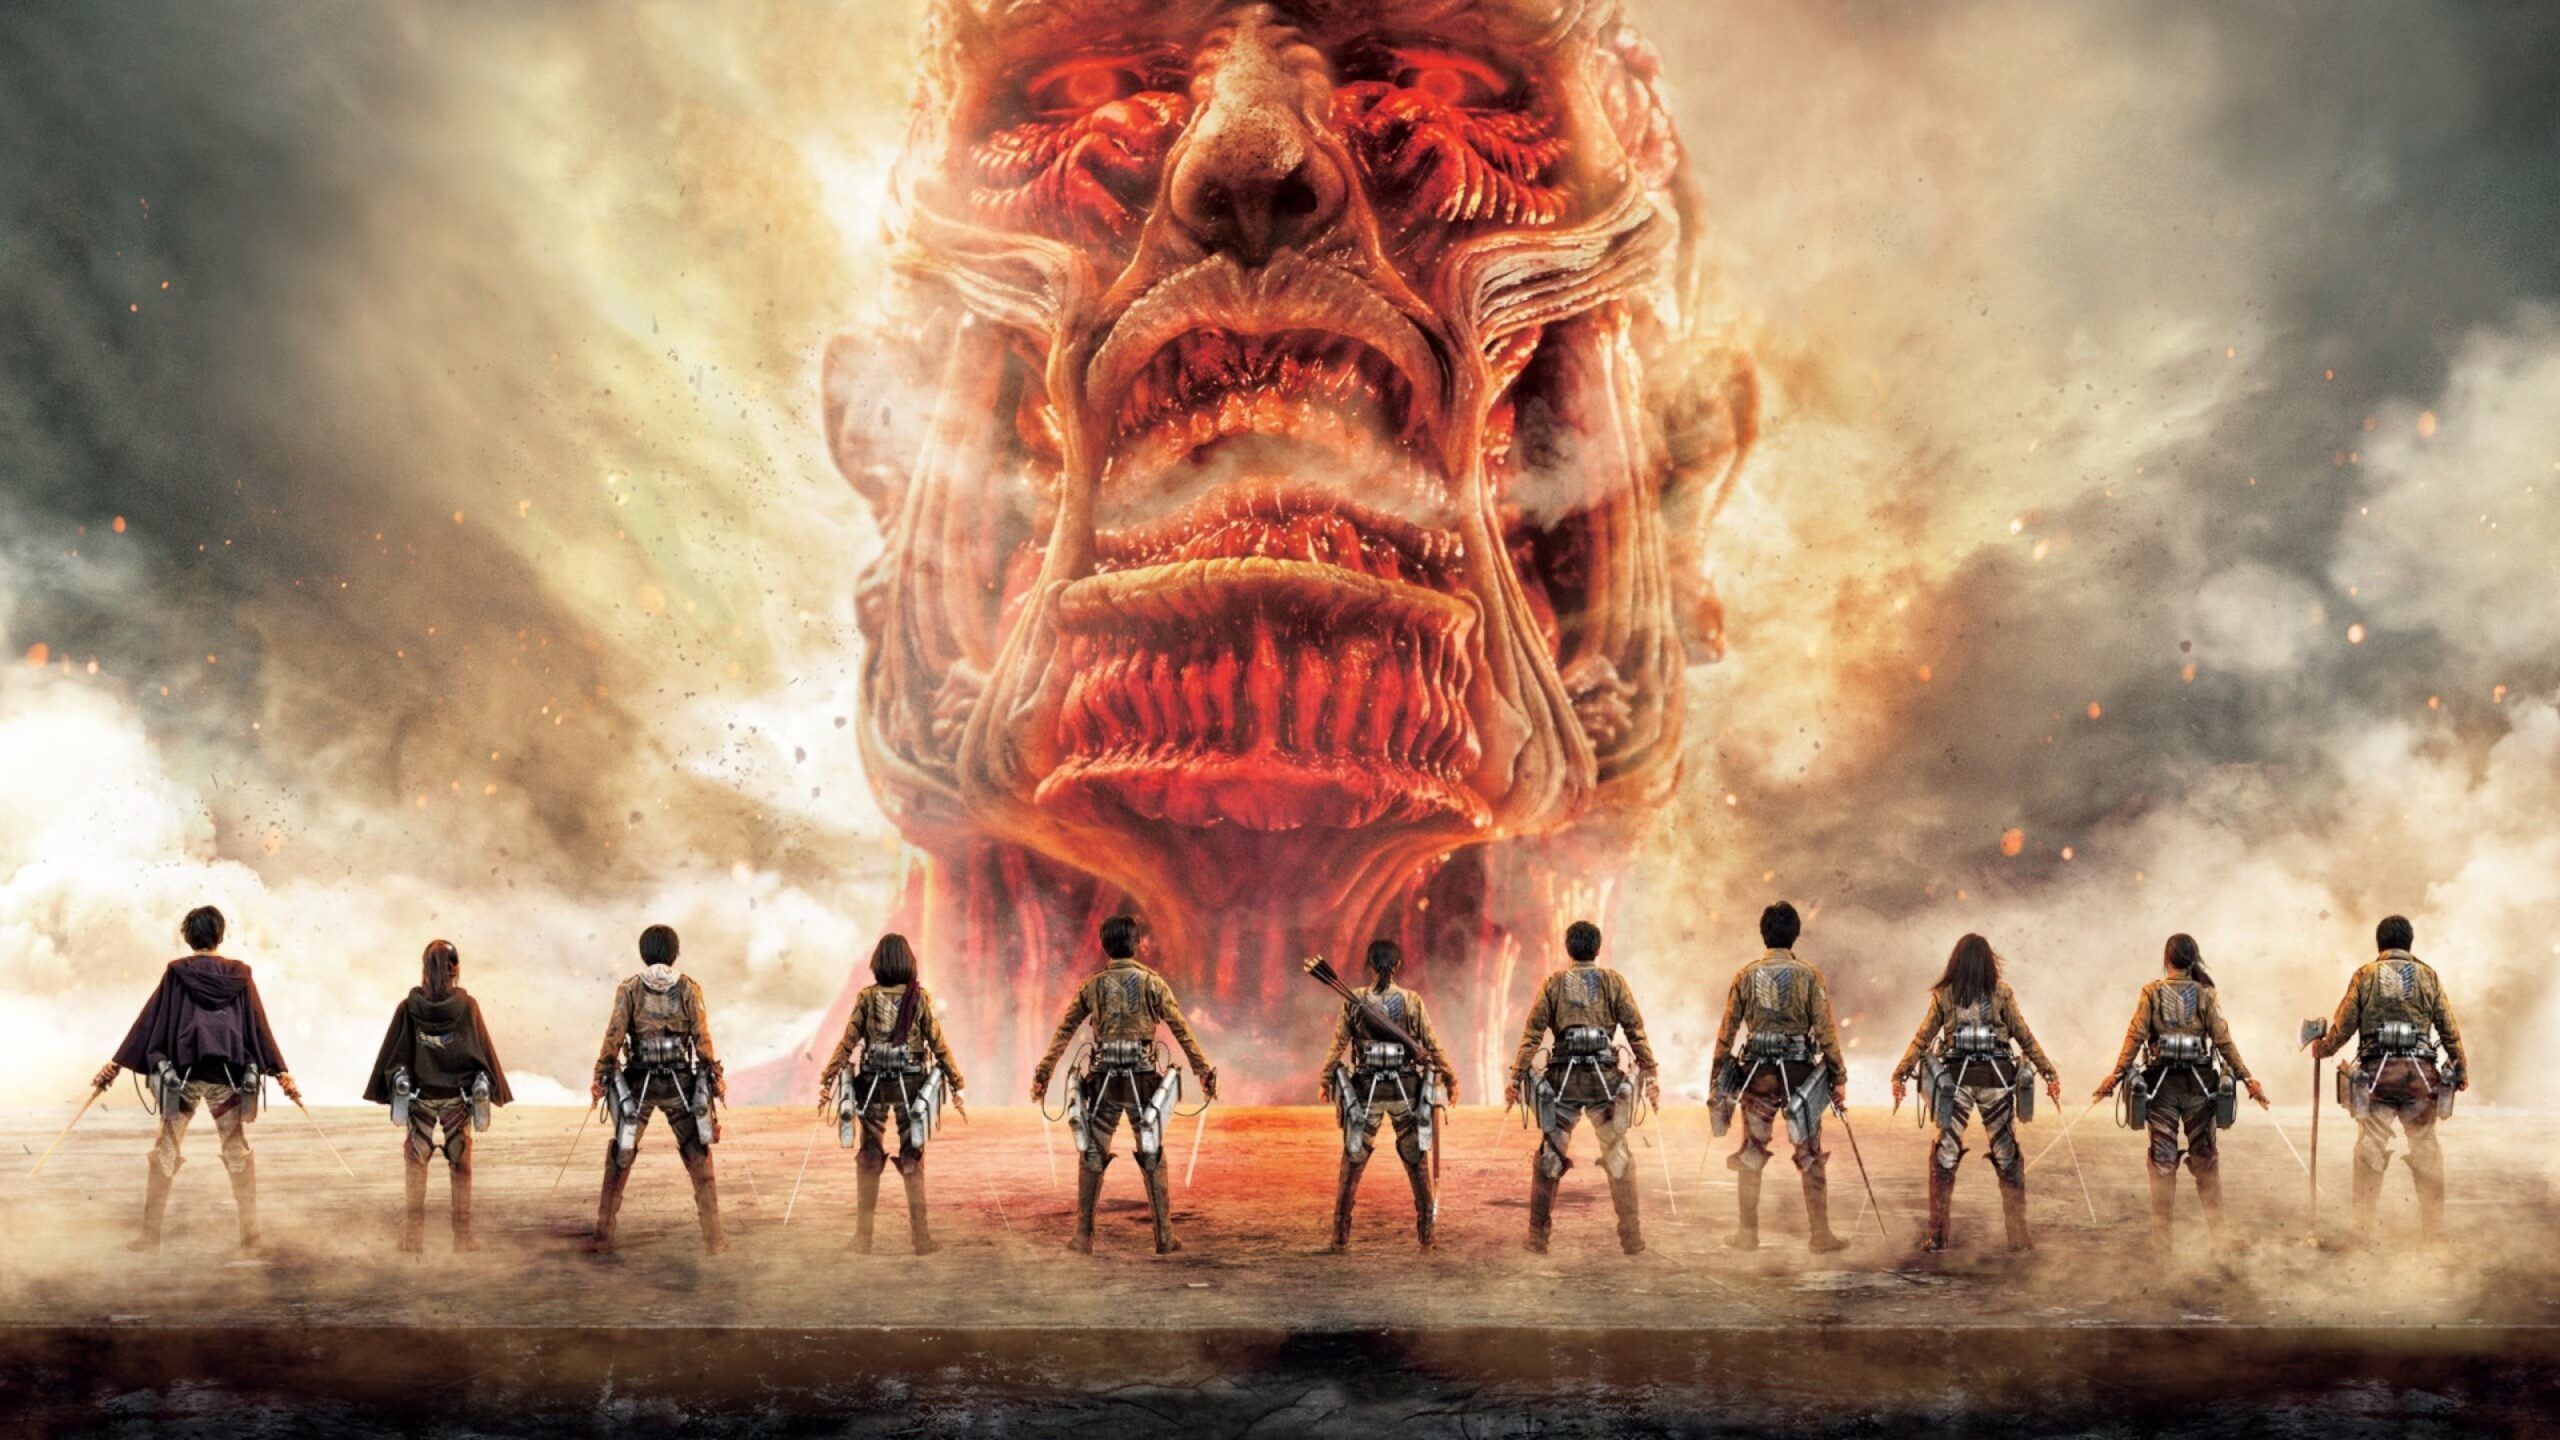 Attack On Titan PC Wallpaper To Download Full Size PC Wallpaper